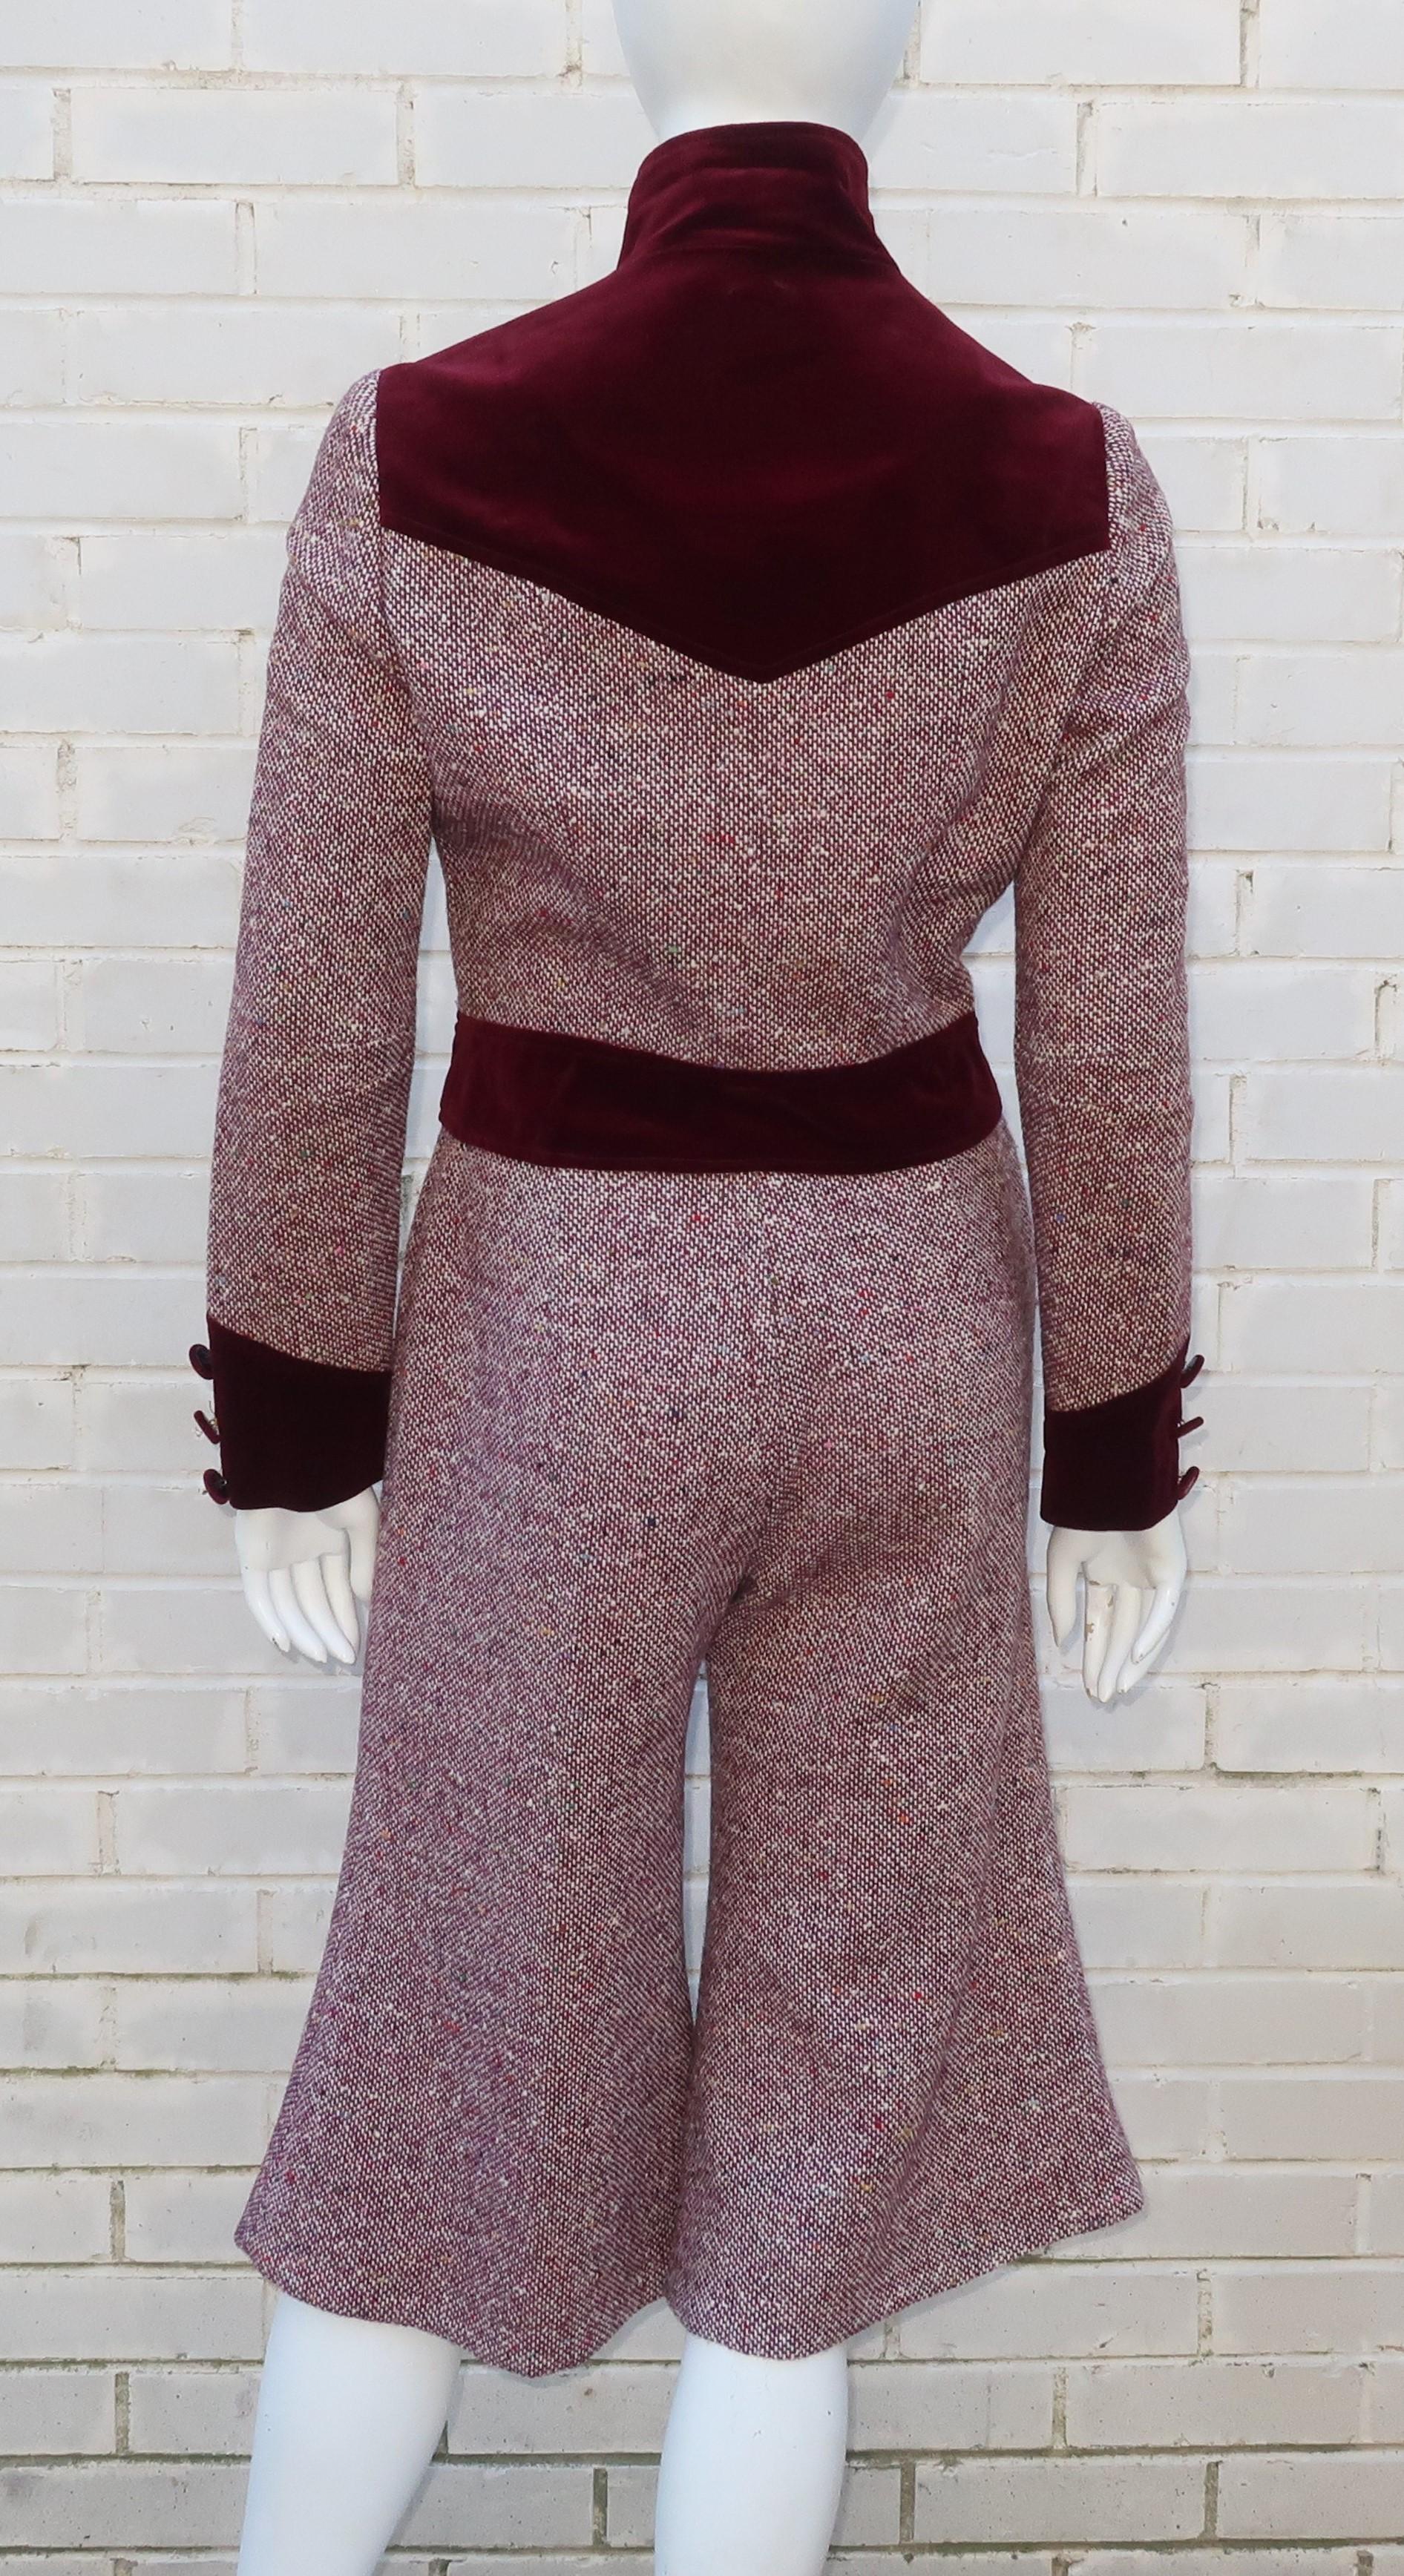 Mod C.1970 Young Victorian Ruby Red Velvet & Wool Tweed Jacket Pant Suit 2